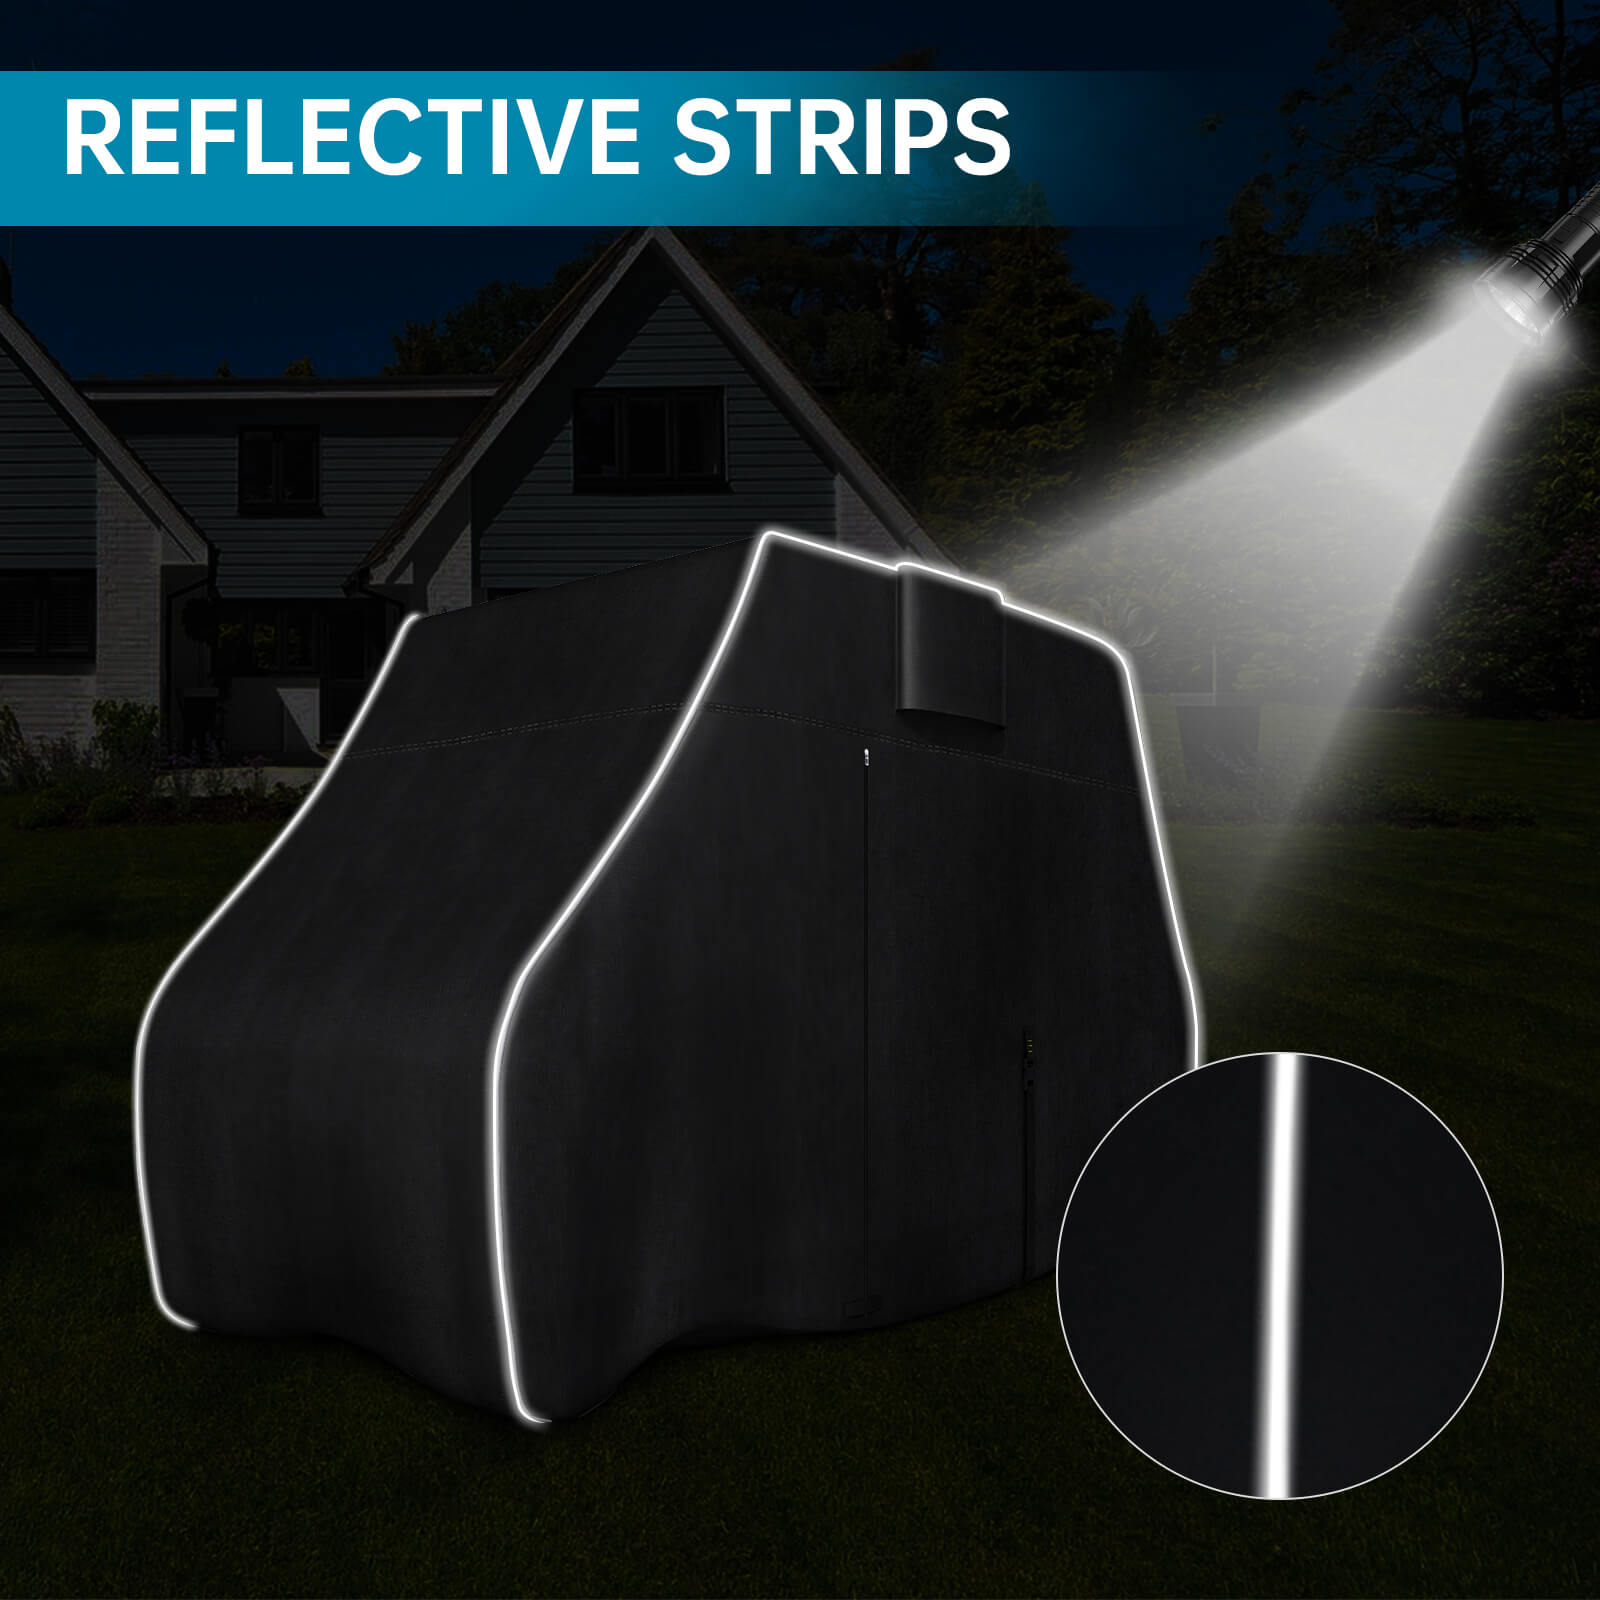 Zenicham 600D Fade and Tear Resistant Golf Cart Cover, Club Car Cover with Reflective Strips